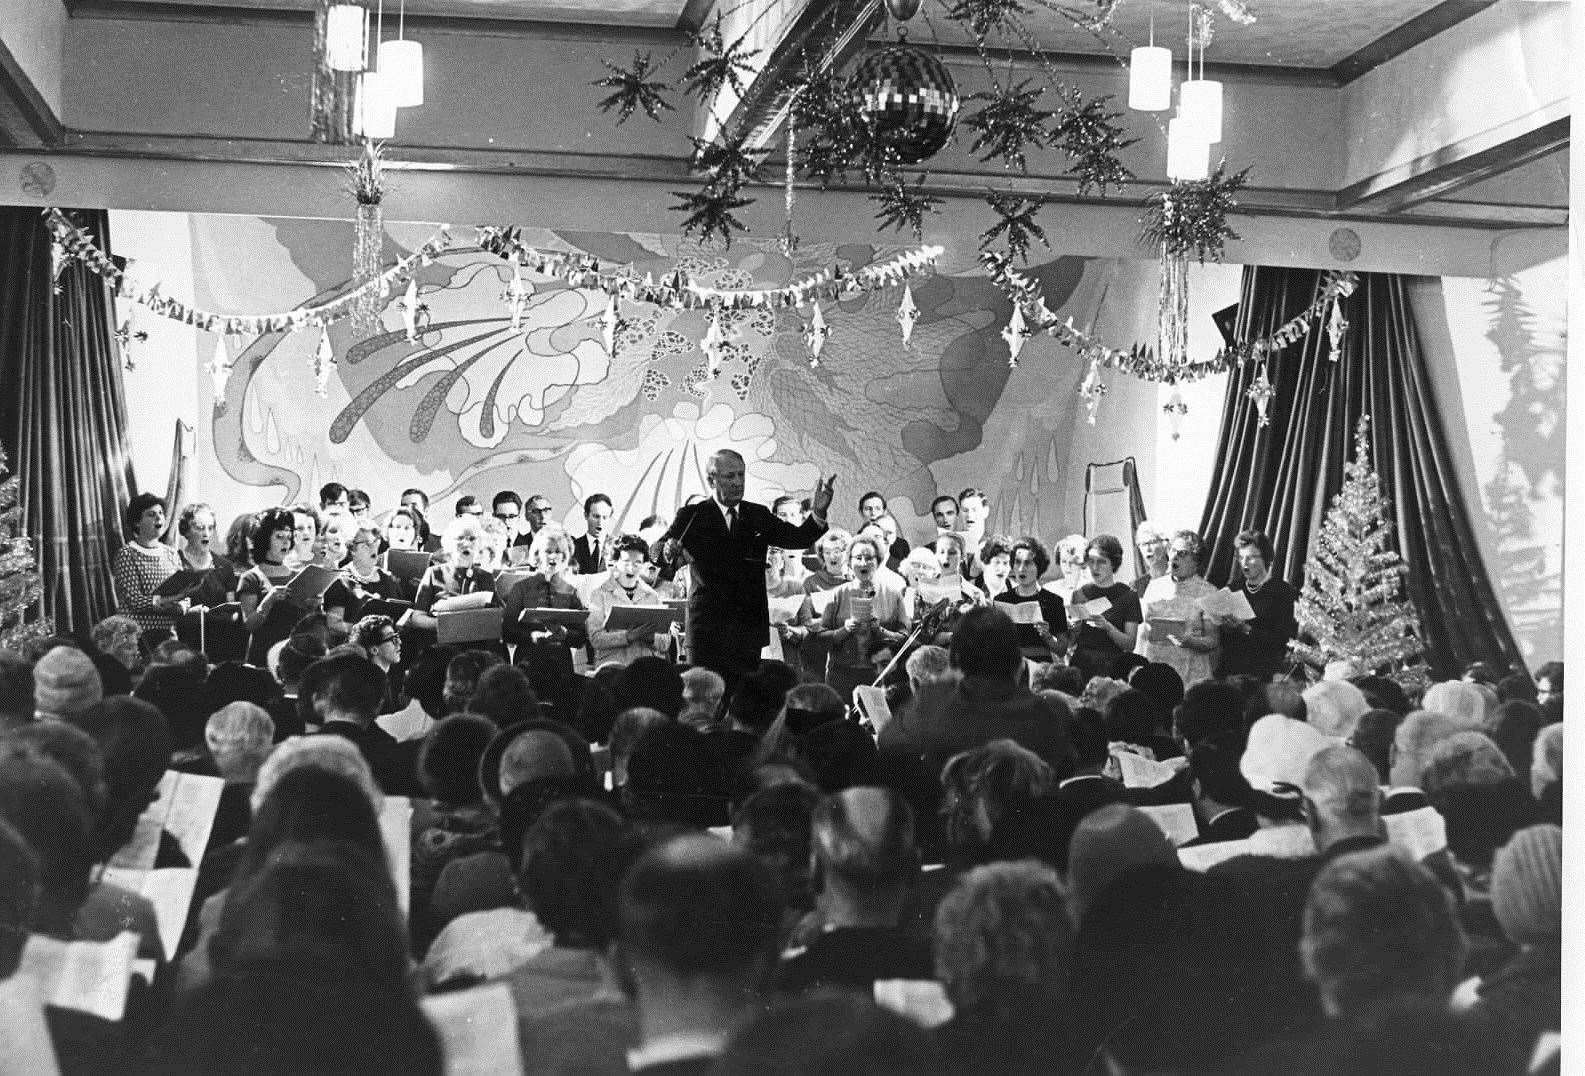 Ted Heath, now Prime Minister, conducting Broadstairs carol service in December 1970